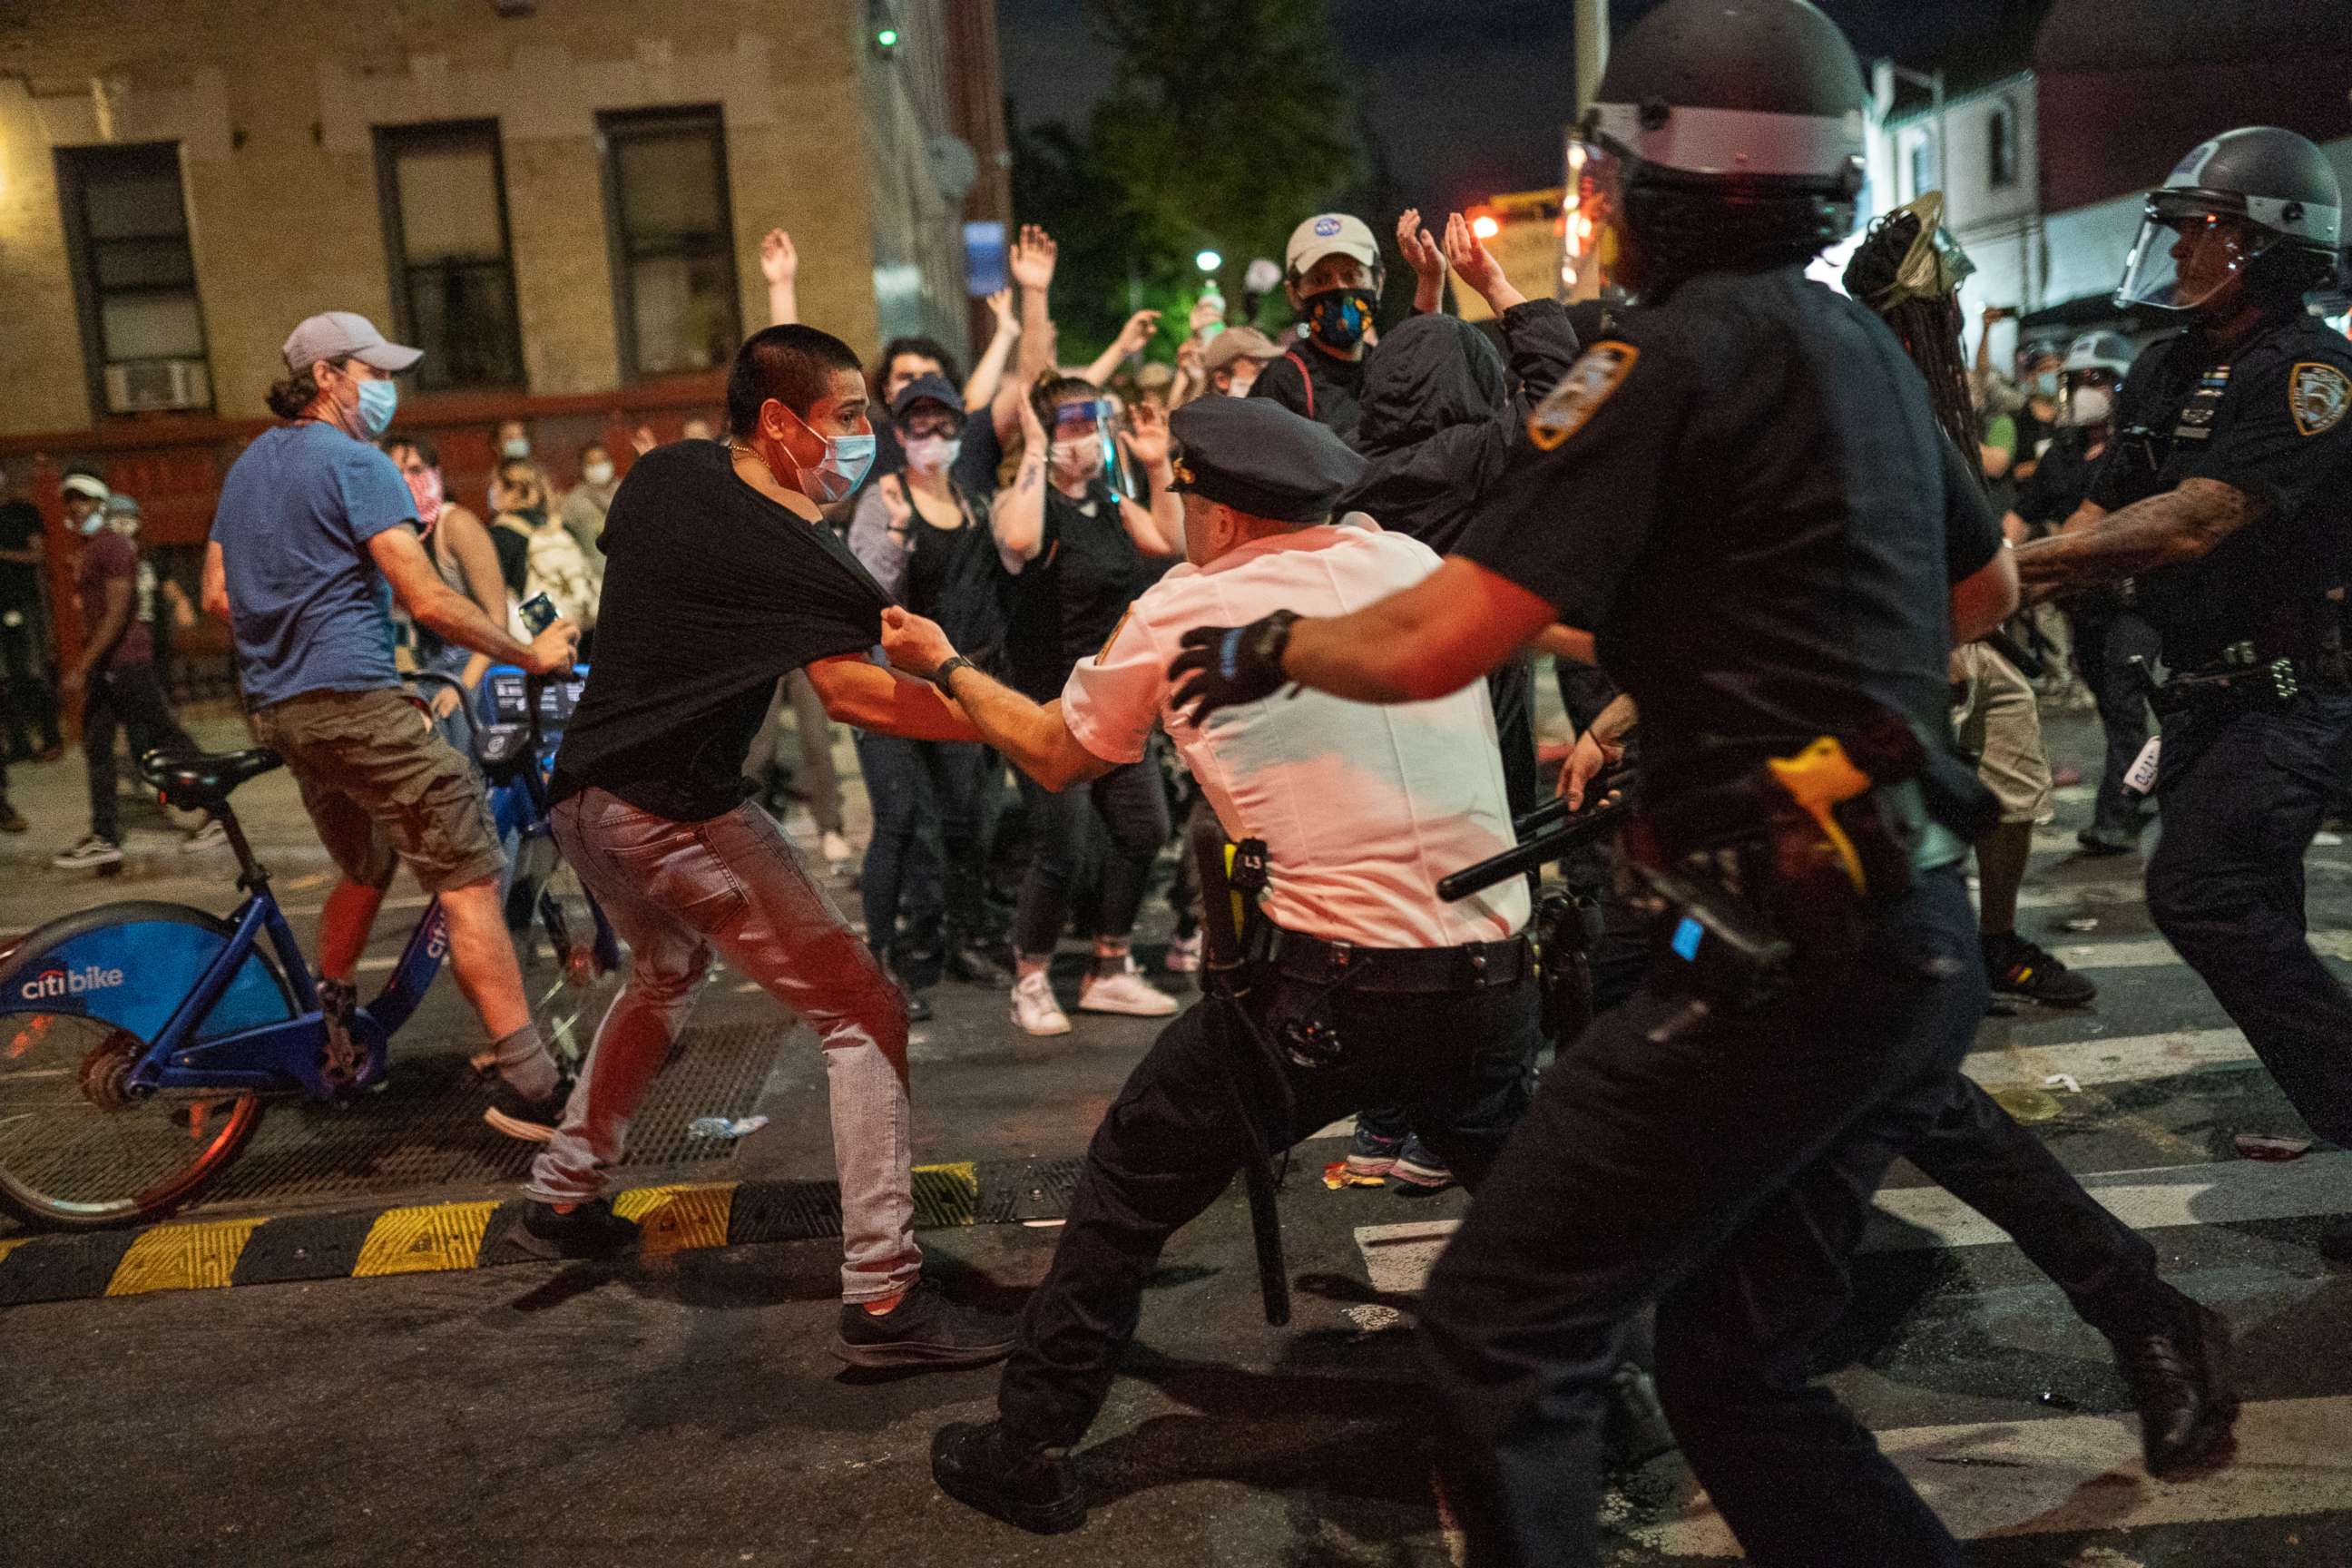 PHOTO: NYPD police officers detain a protester as they clash during a march against the death in Minneapolis police custody of George Floyd, in Brooklyn, New York, May 30, 2020.